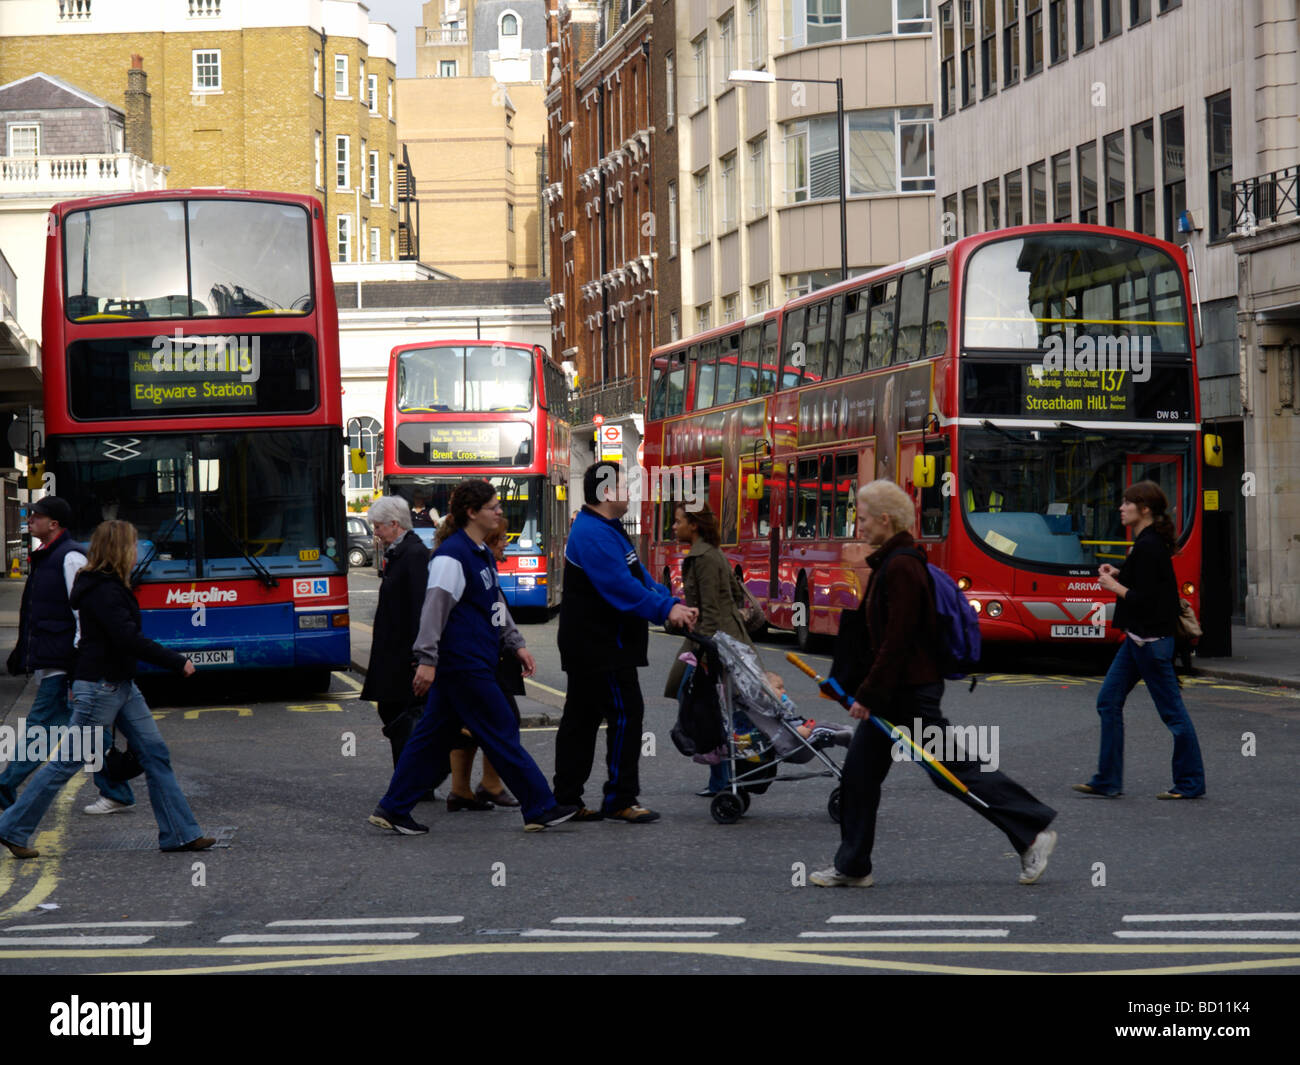 People crossing the street with red London buses in the background image shot from Oxford Street London UK Stock Photo